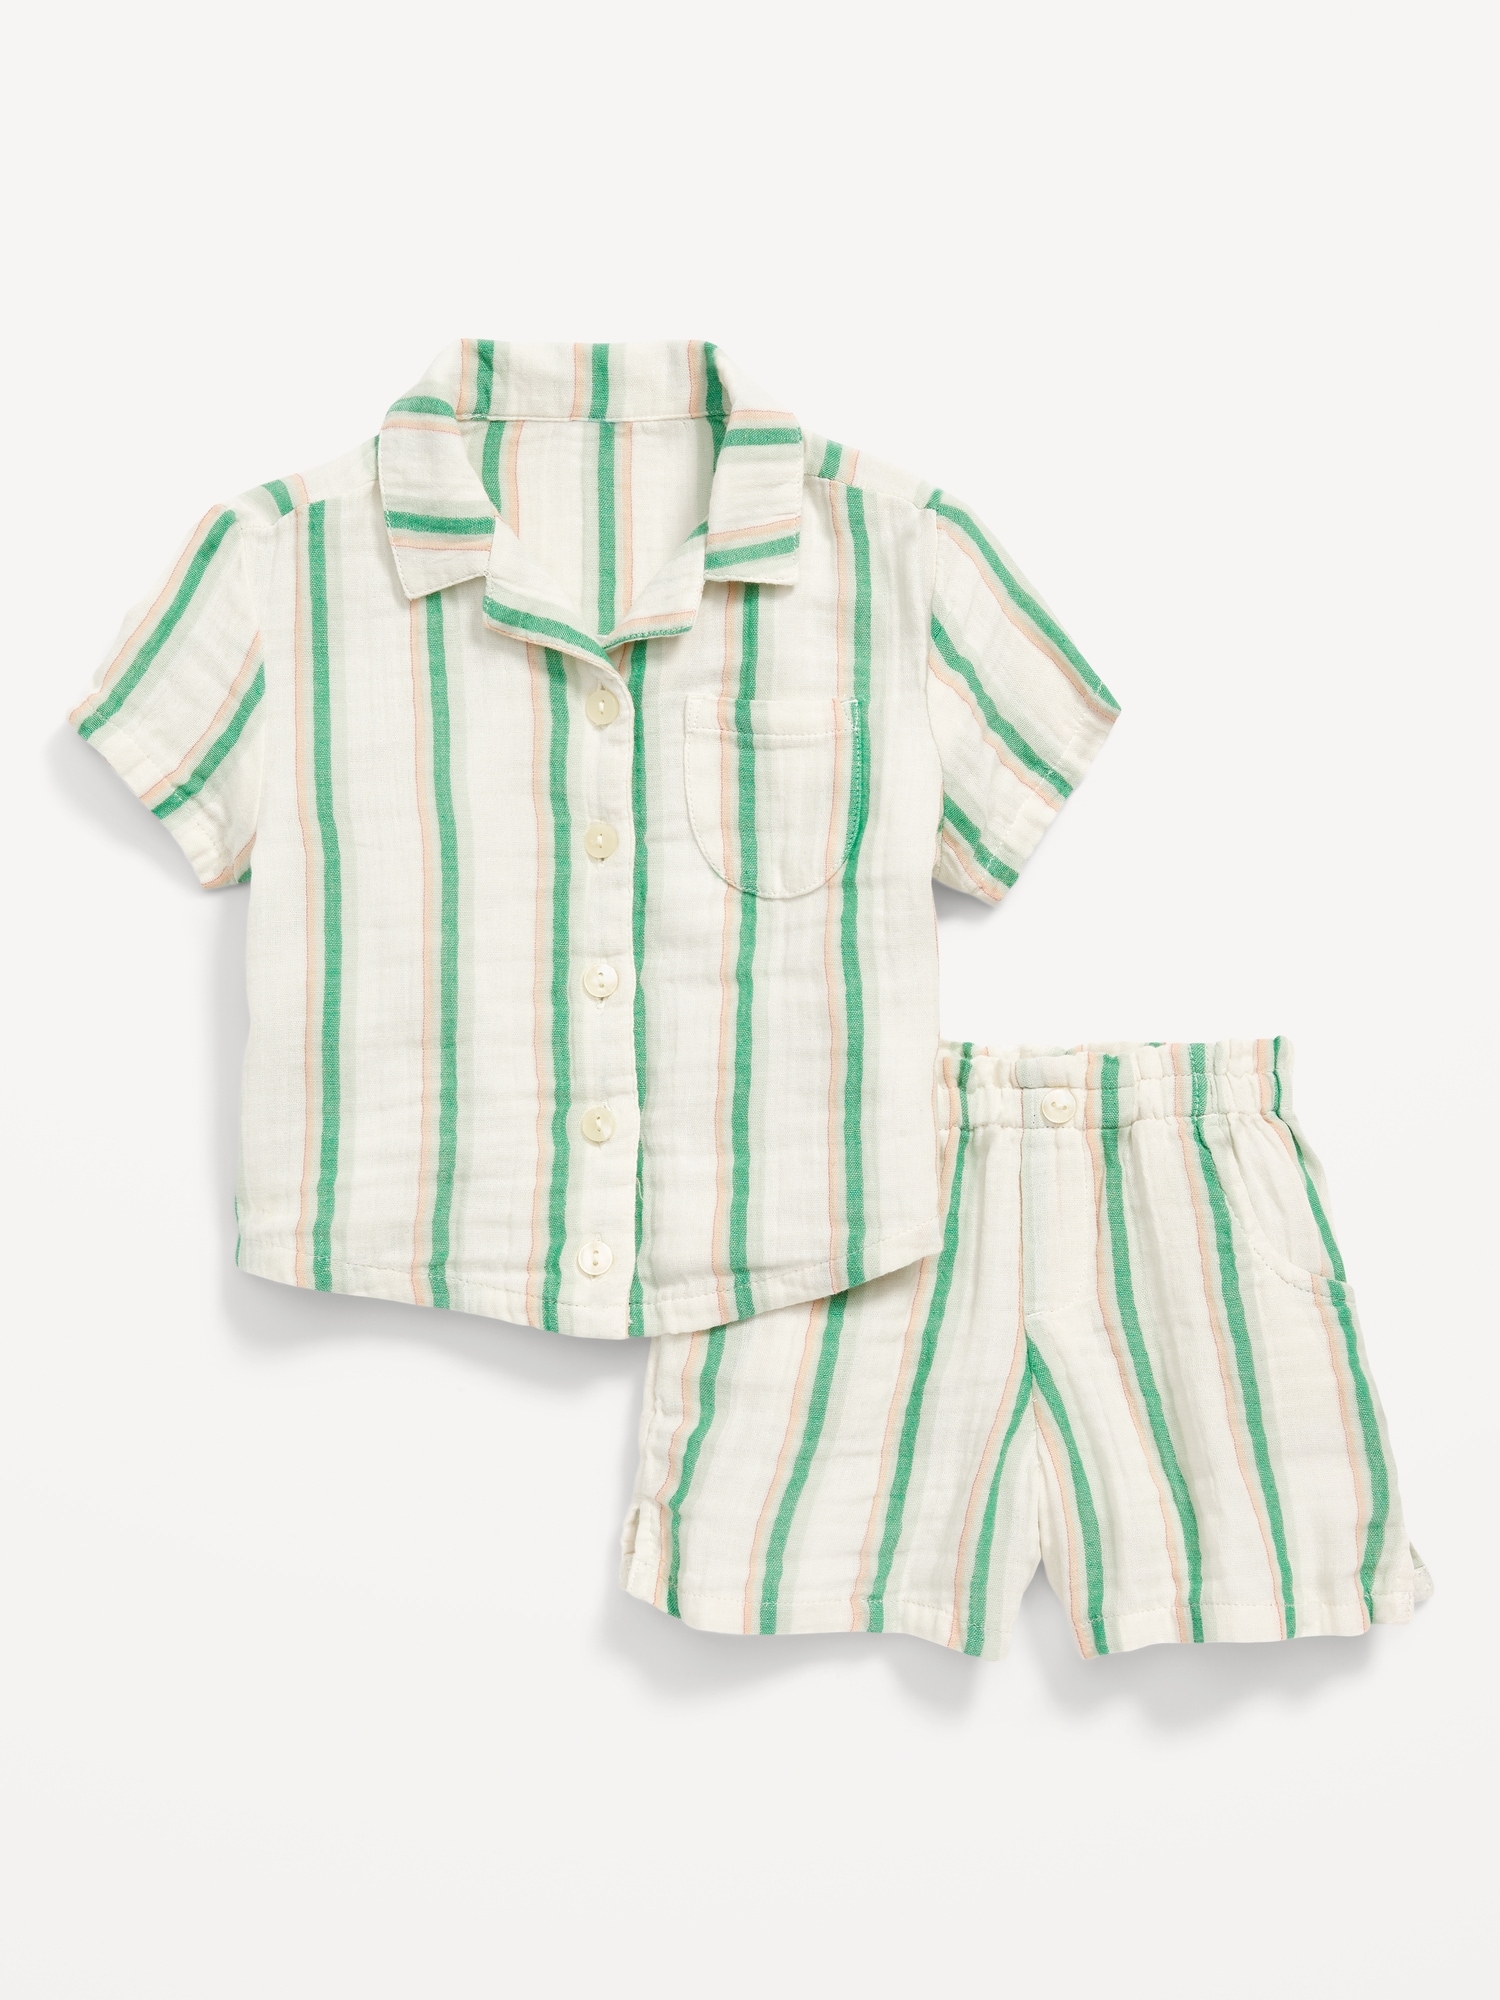 Summer Old Navy Matching Sets For Teenage Boys And Girls Short Sleeve Strip  Top And Skirt Pants Suit From Mobeisiran, $37.12